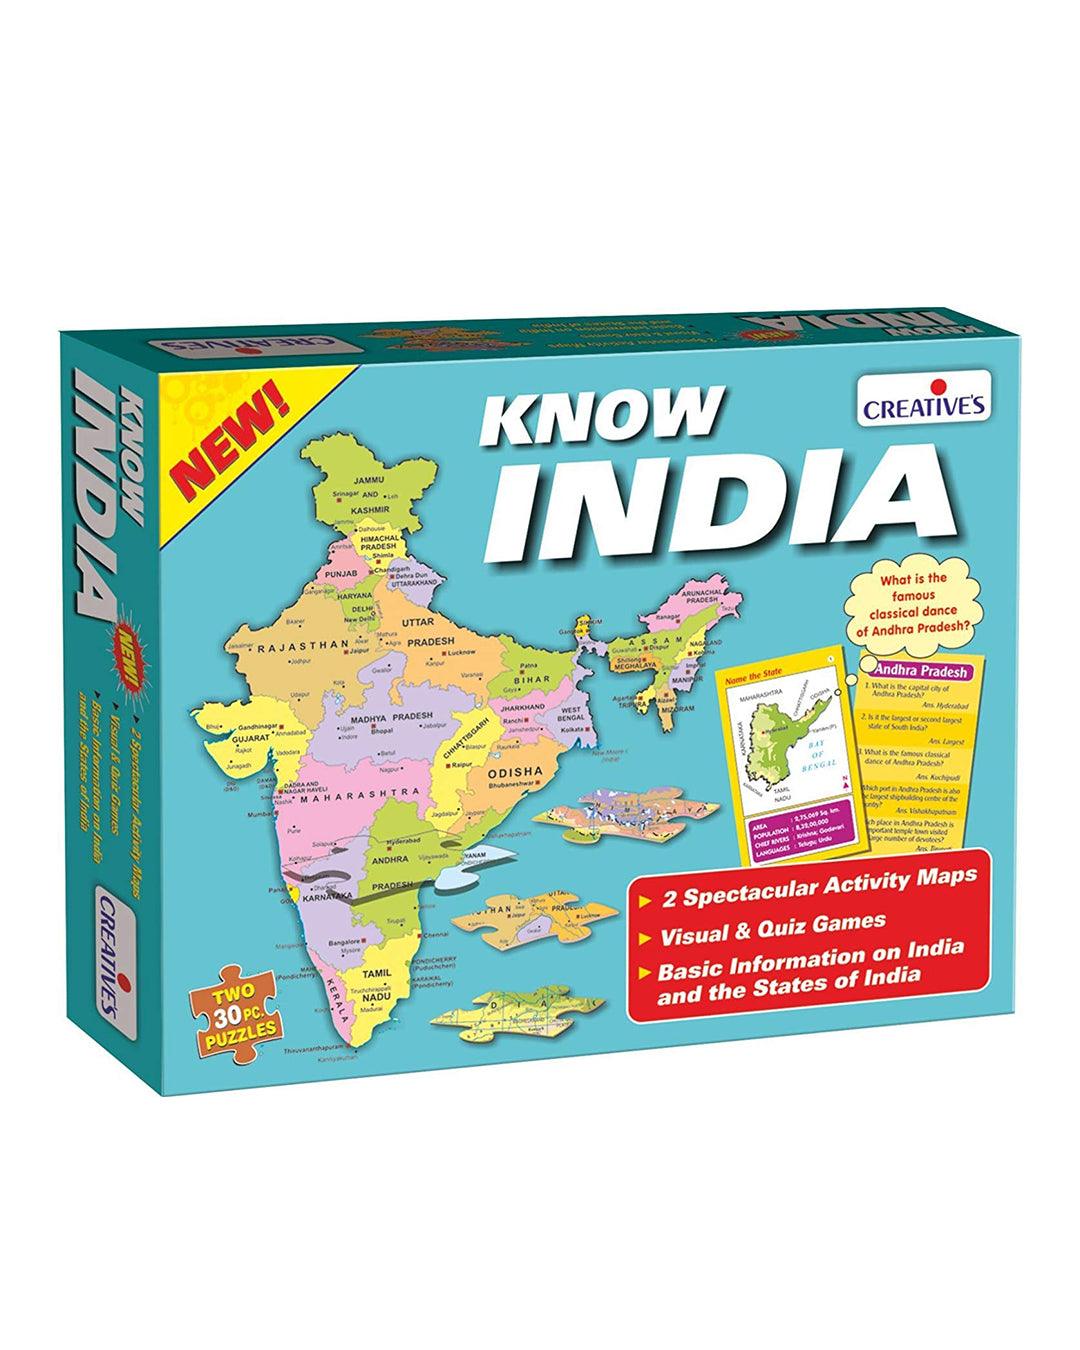 Creative Know India Activity for Kids (30 Pcs Puzzles) - For Child Age 5 & Up - MARKET 99